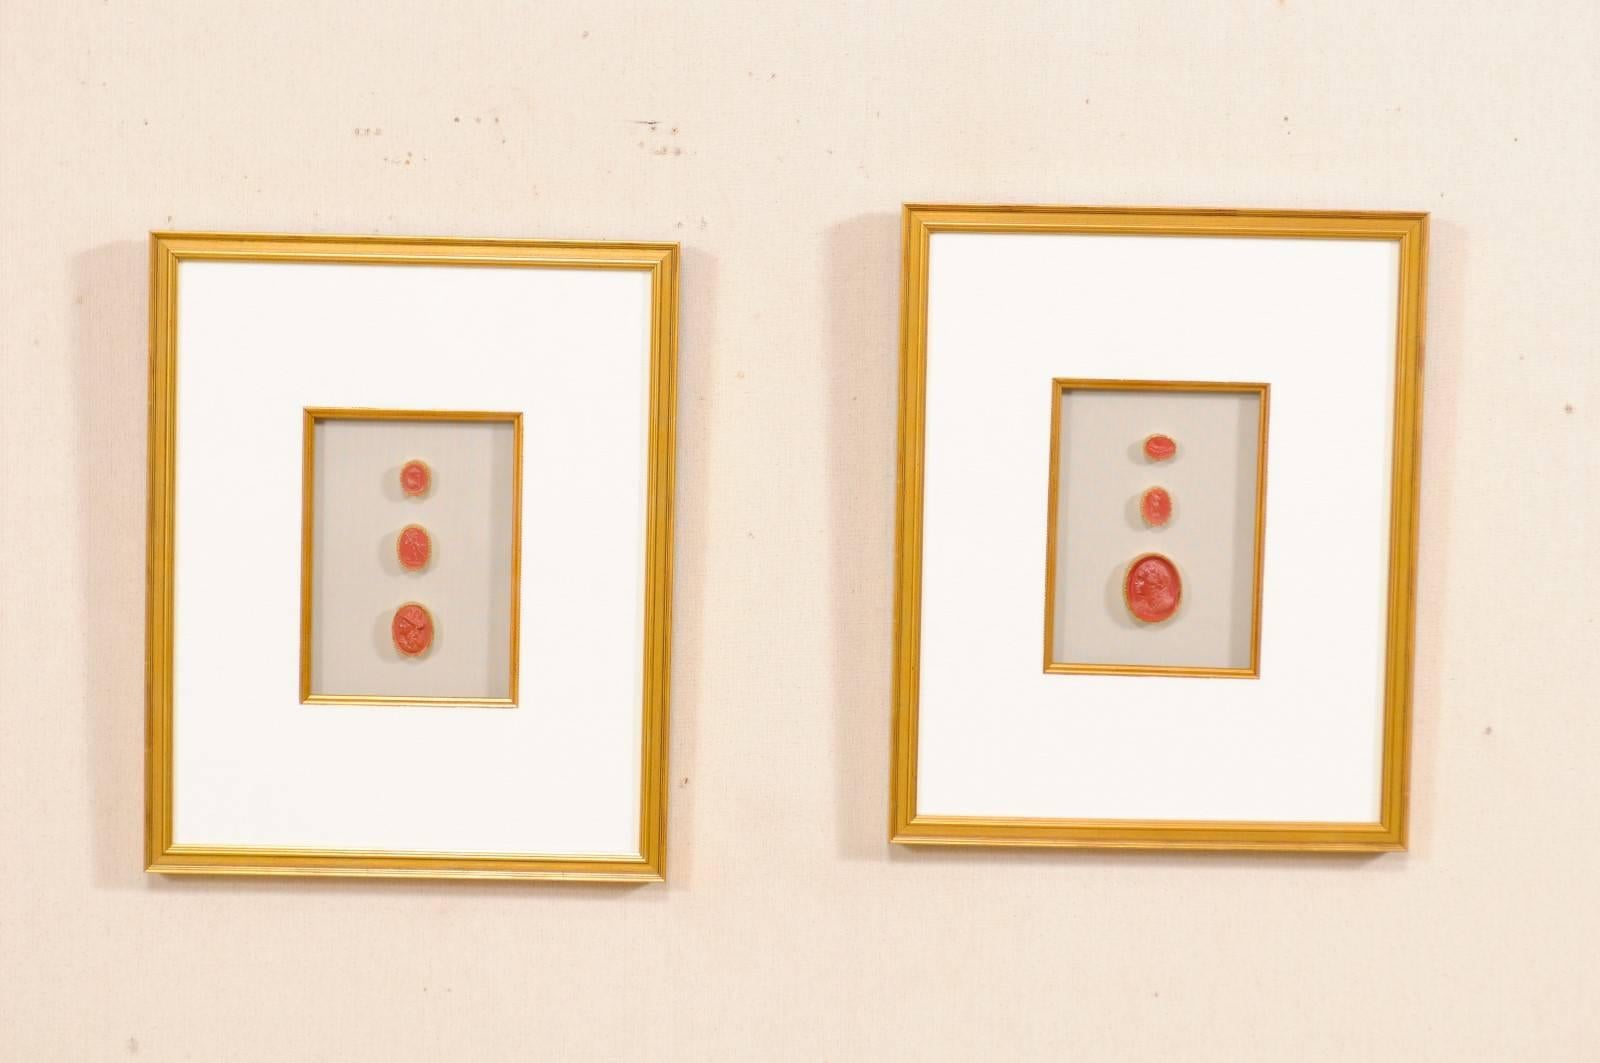 A pair of neoclassical Italian red intaglios from the early 20th century in custom frames. This set of red colored antique Italian intaglios (which were purchased by us in Sweden) have been set within a pair of custom wood framed shadow boxes with